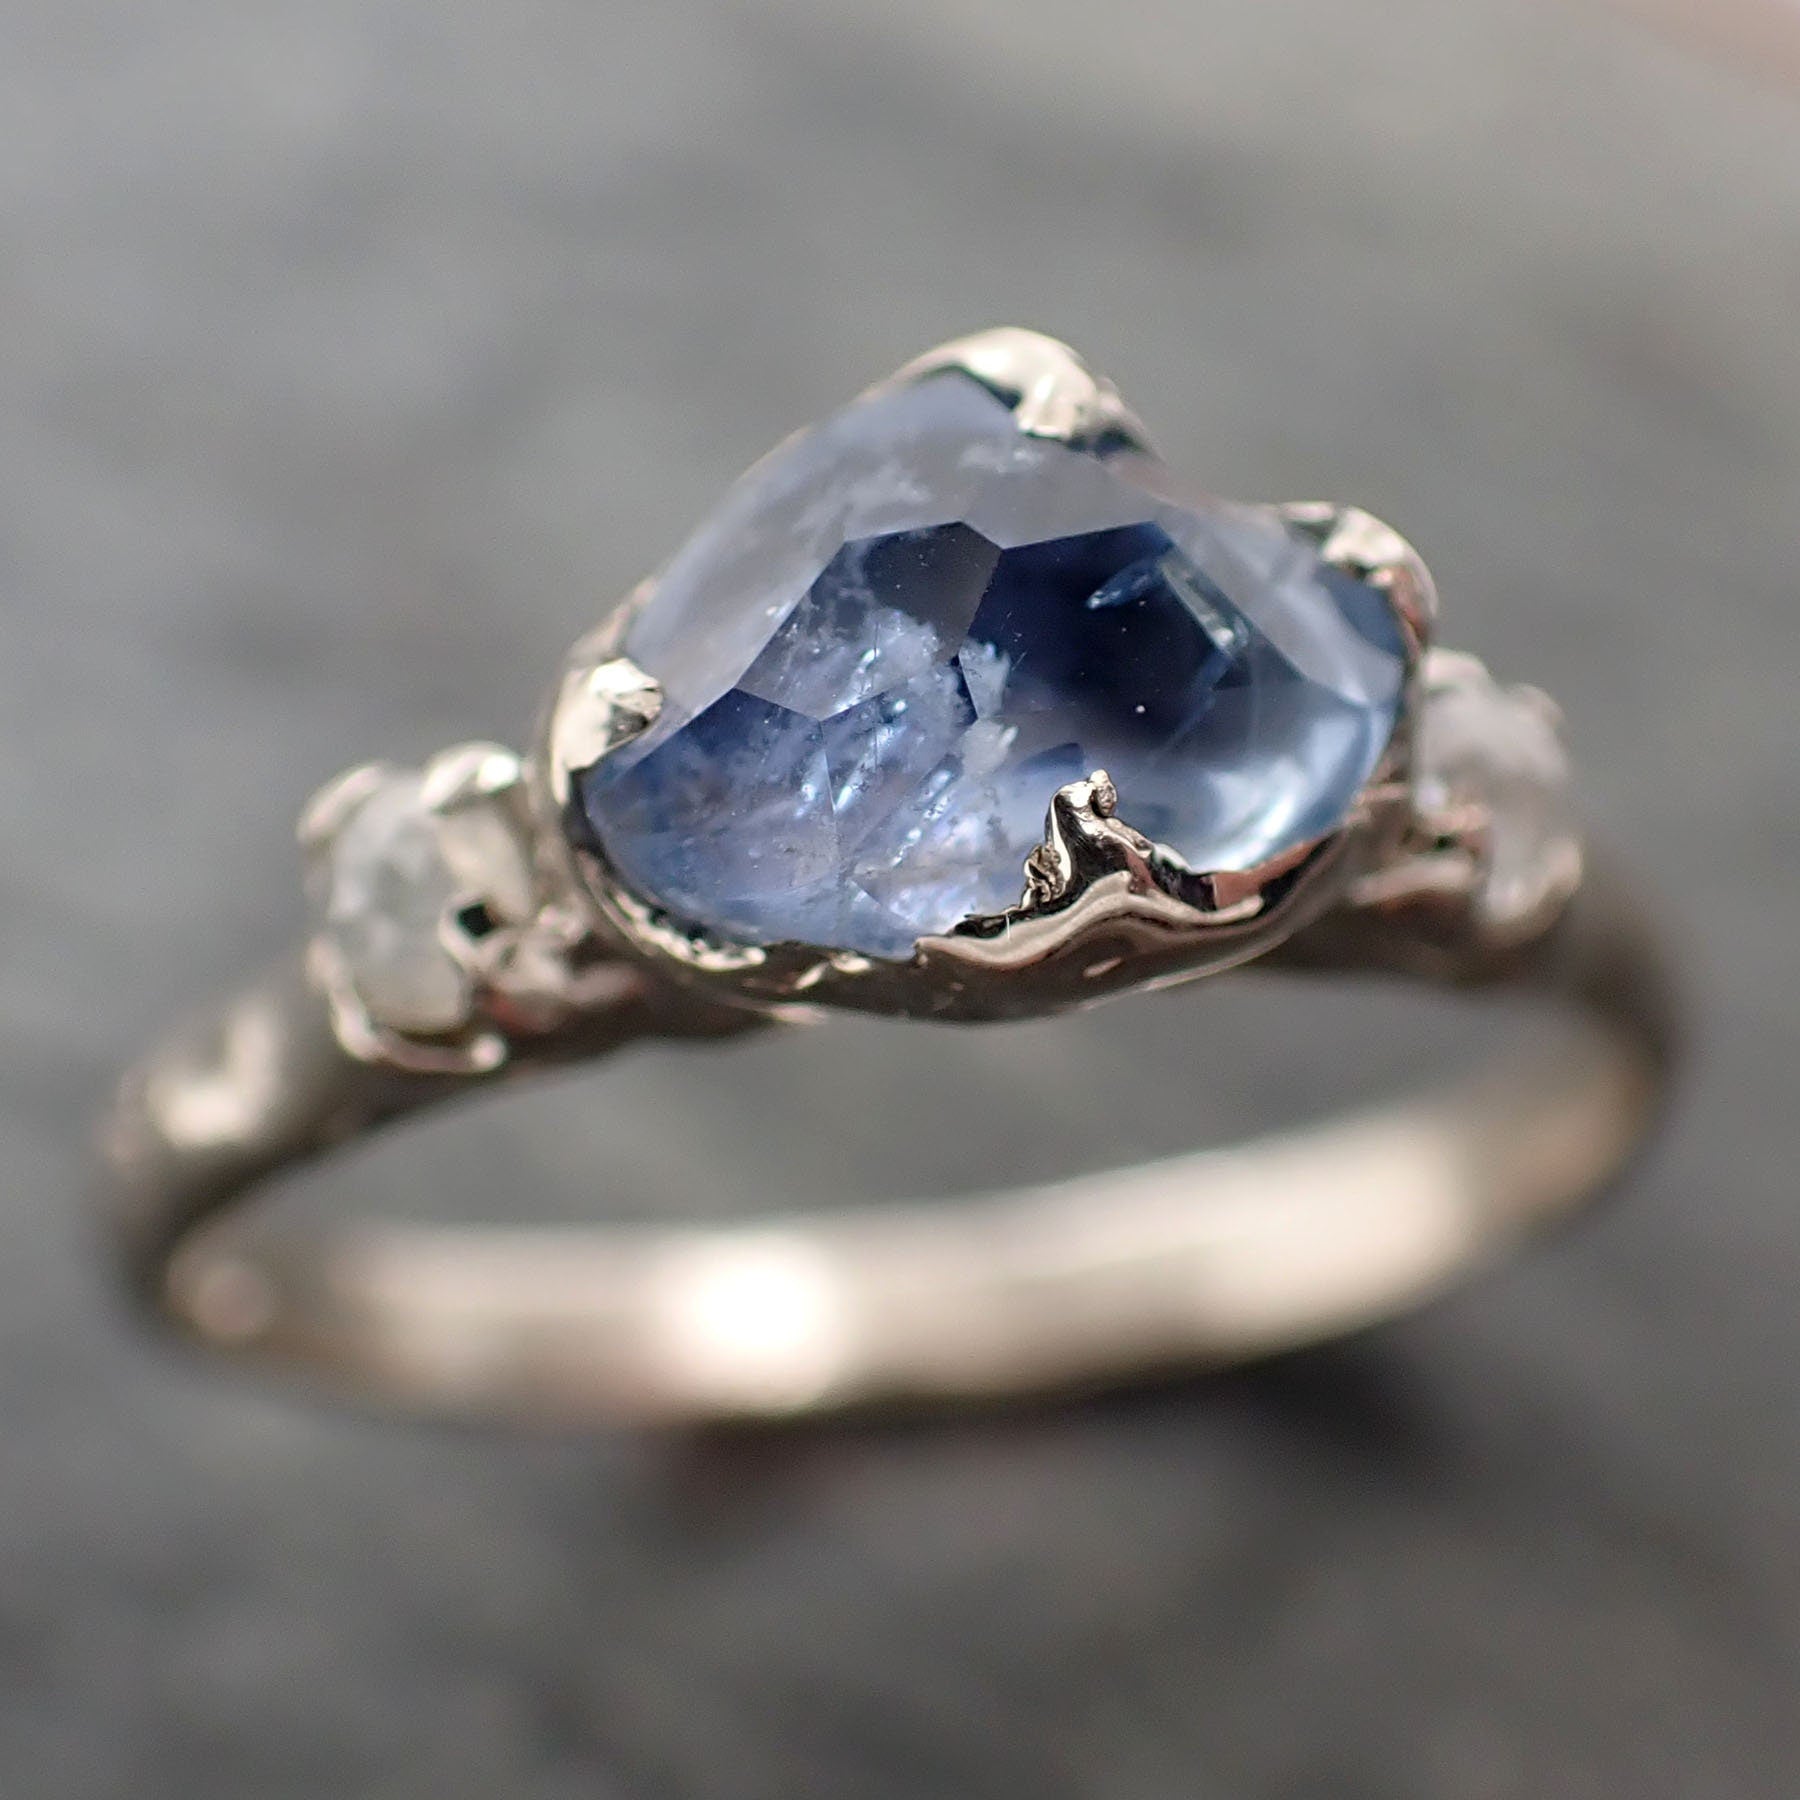 Partially Faceted Sapphire with fancy cut Diamond